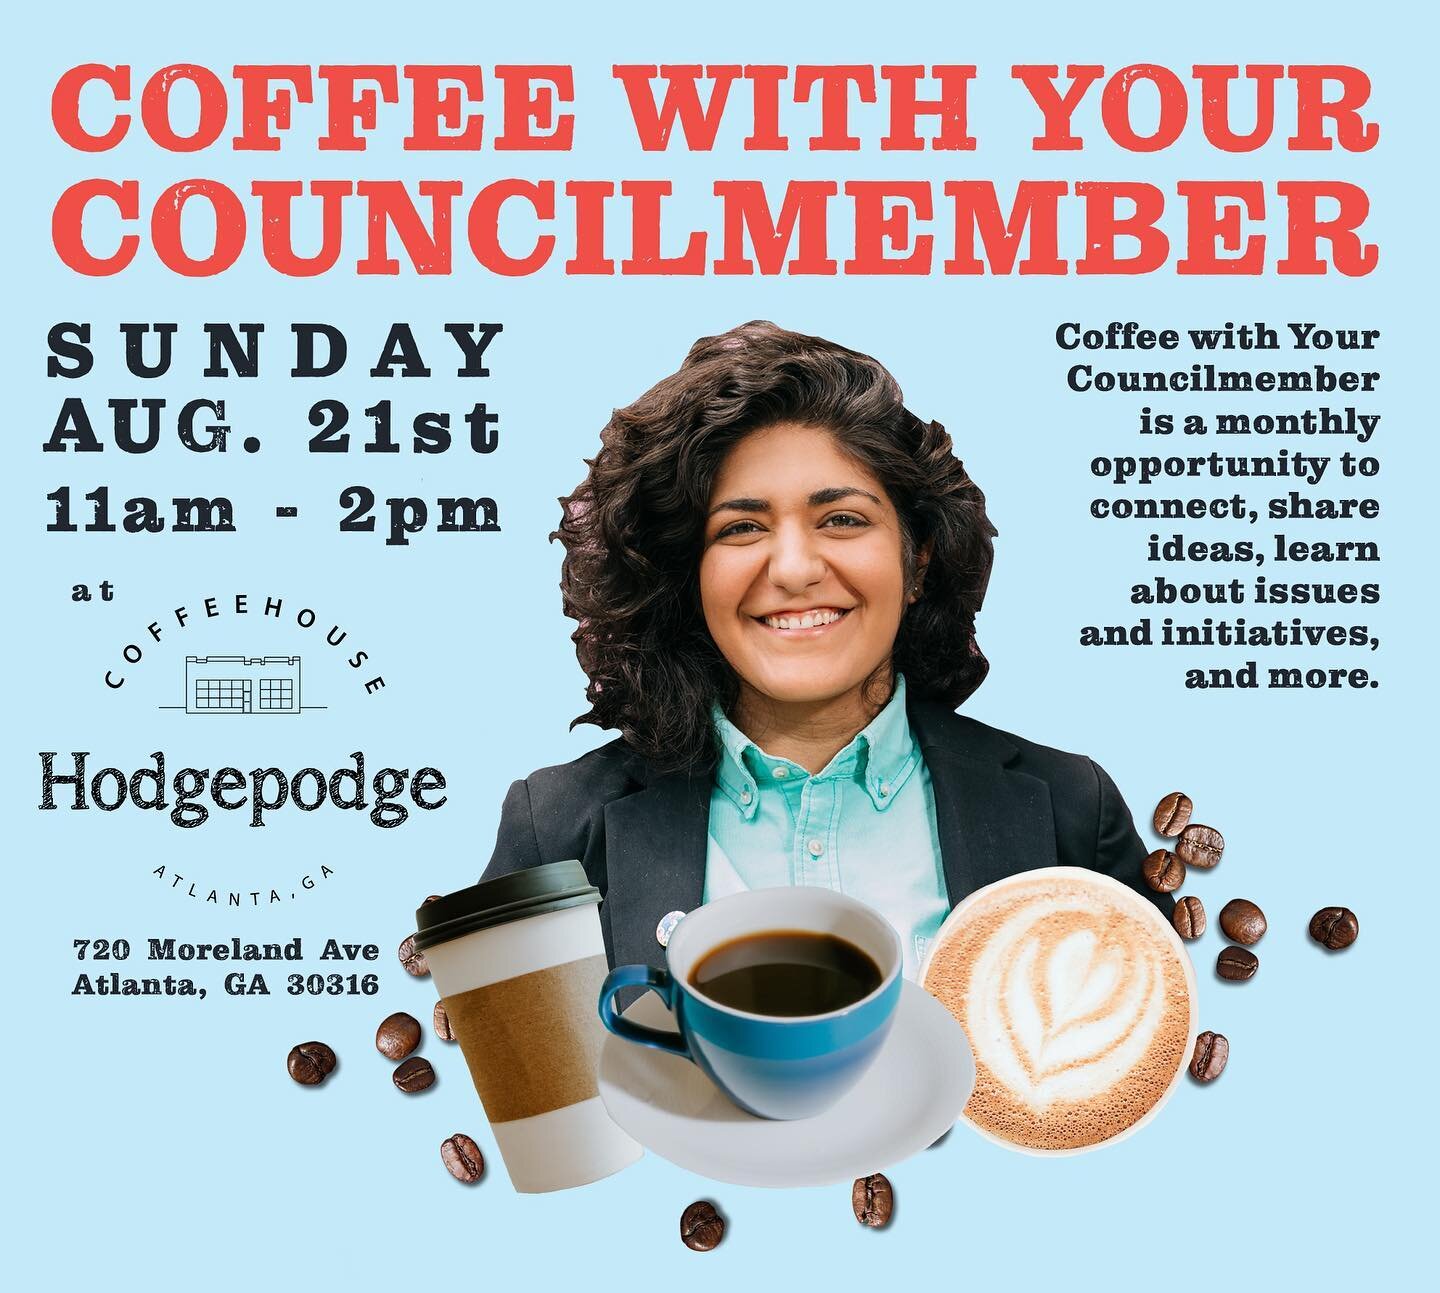 Join us this Sunday for August&rsquo;s edition of Coffee with Your Councilmember! We&rsquo;ll be at @hodgepodgecoffee from 11am - 2pm, chatting about neighborhood issues, concerns, ideas, and more. Stop by anytime, all are welcome!